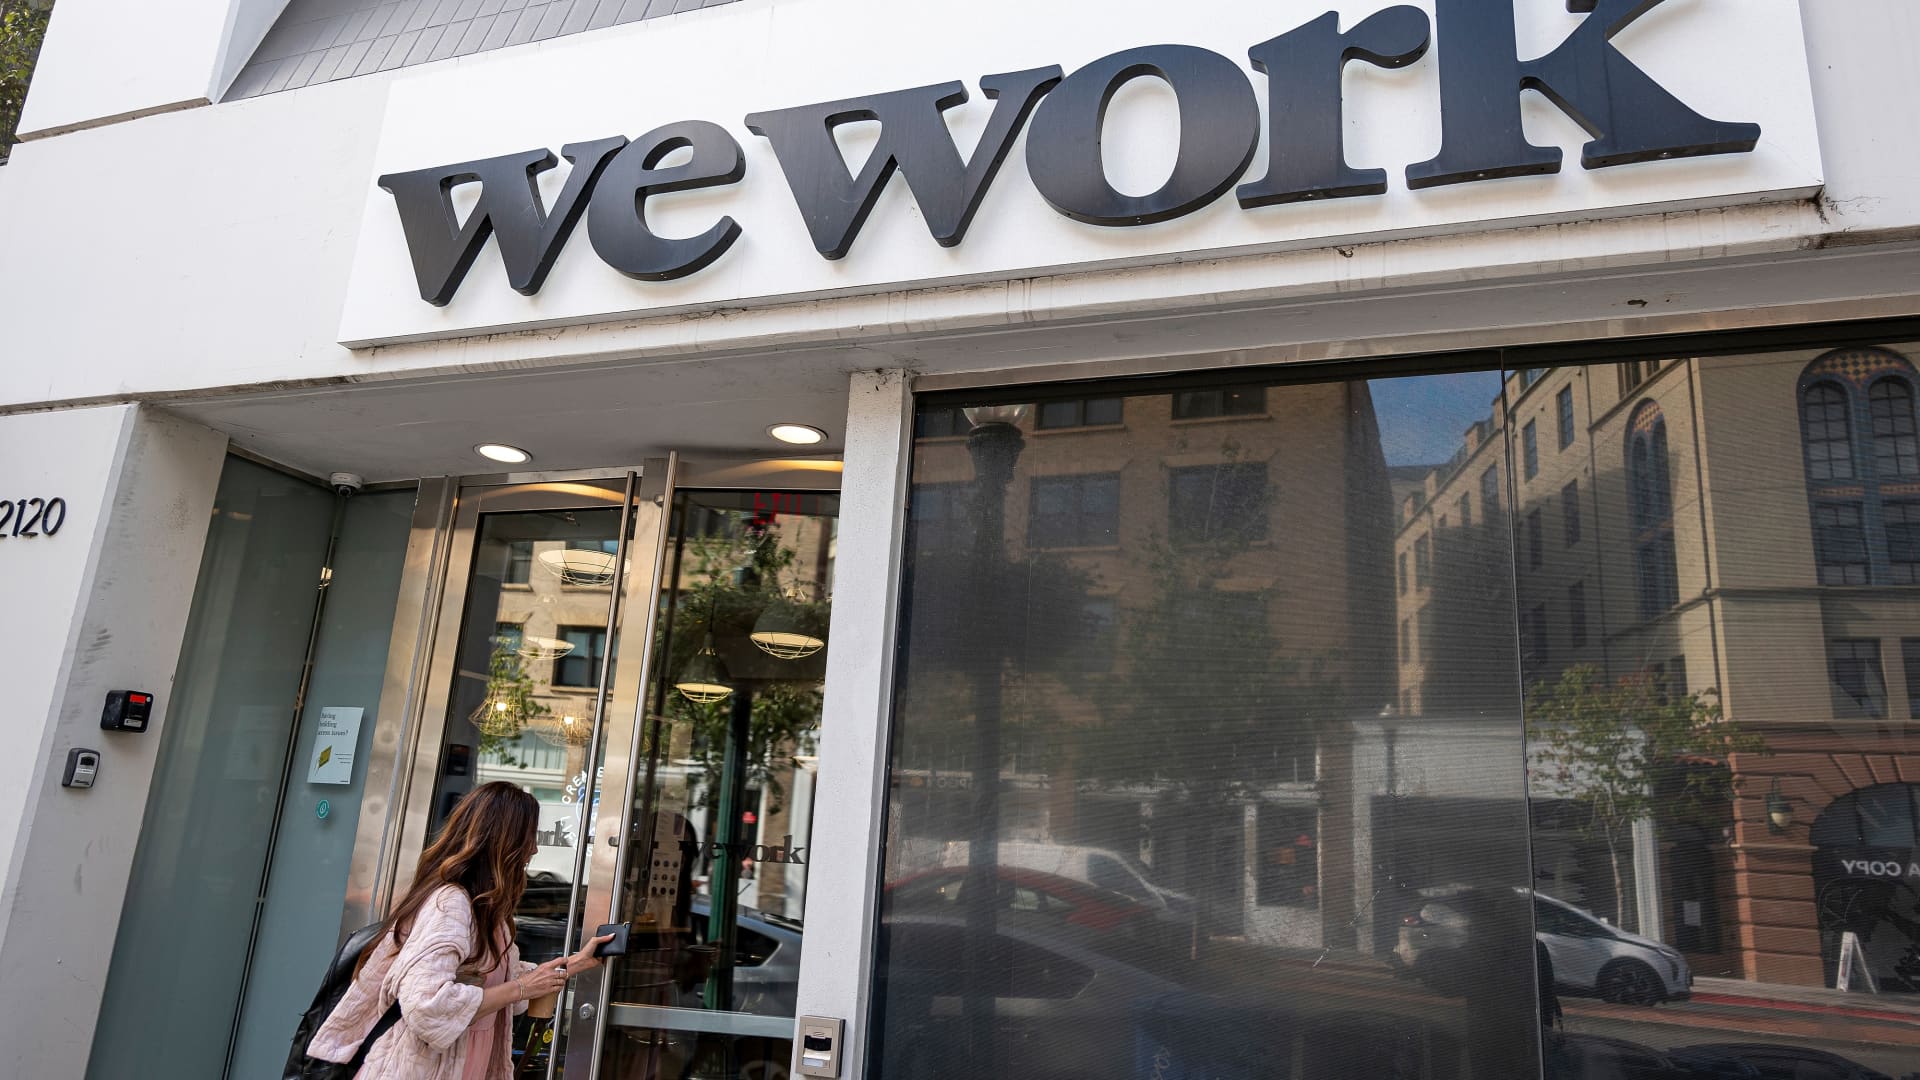 WeWork CEO says company is 'here to stay' as it renegotiates leases